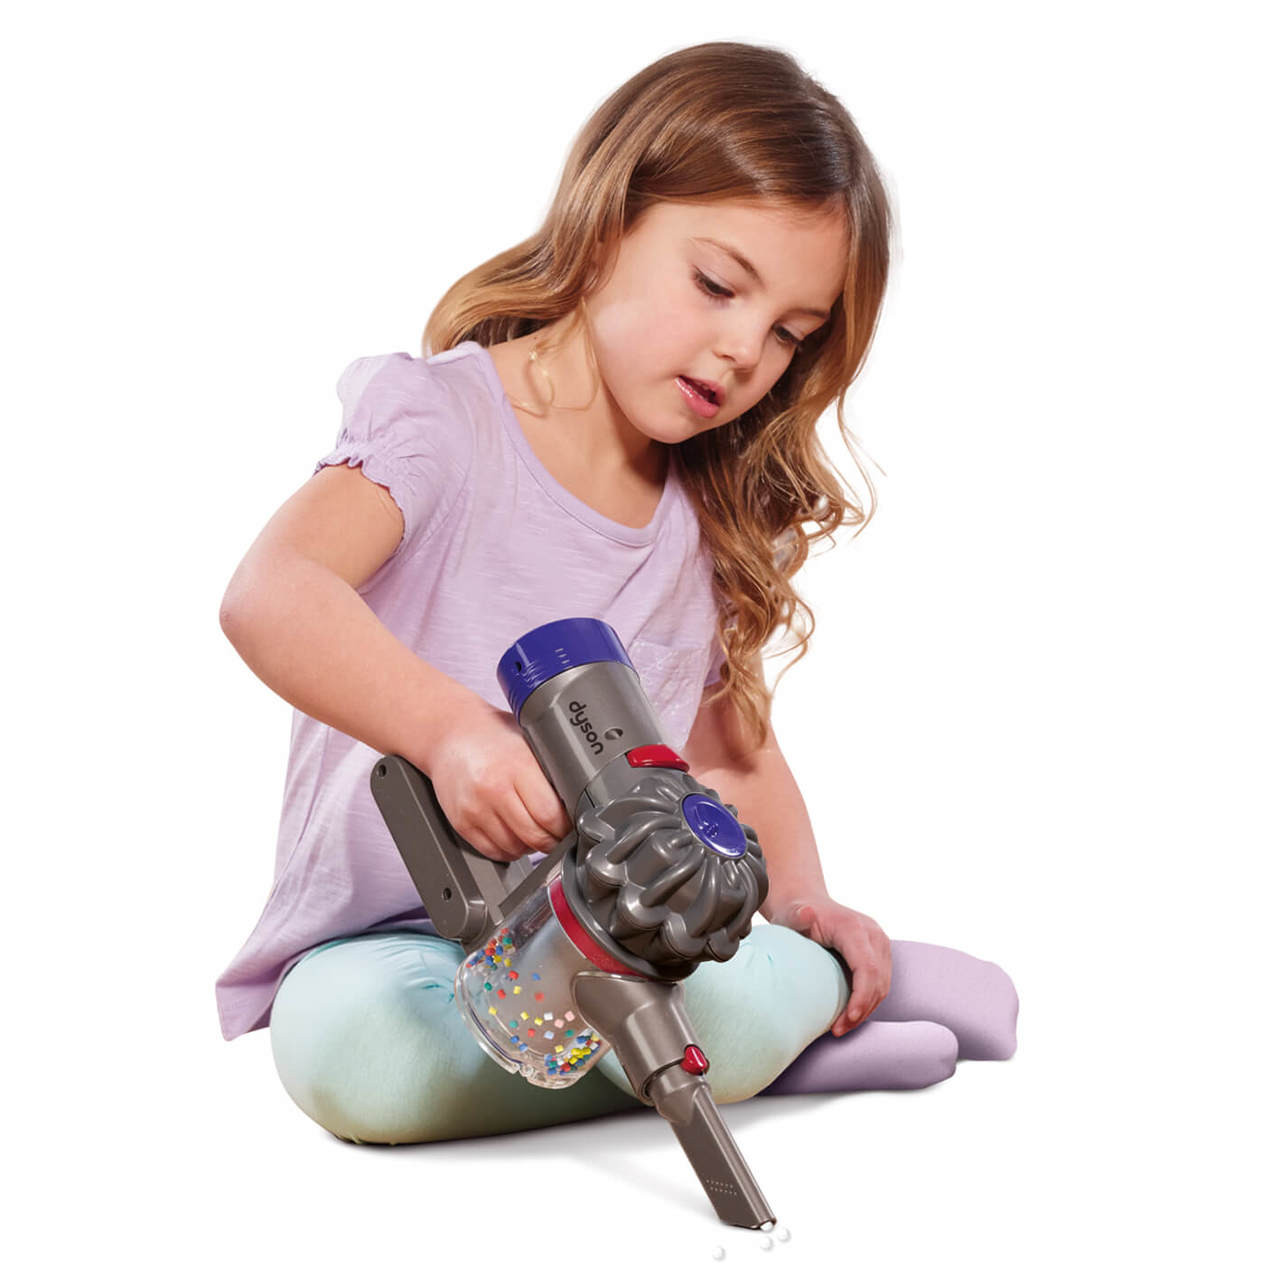 Dyson Cord-Free Toy Vacuum